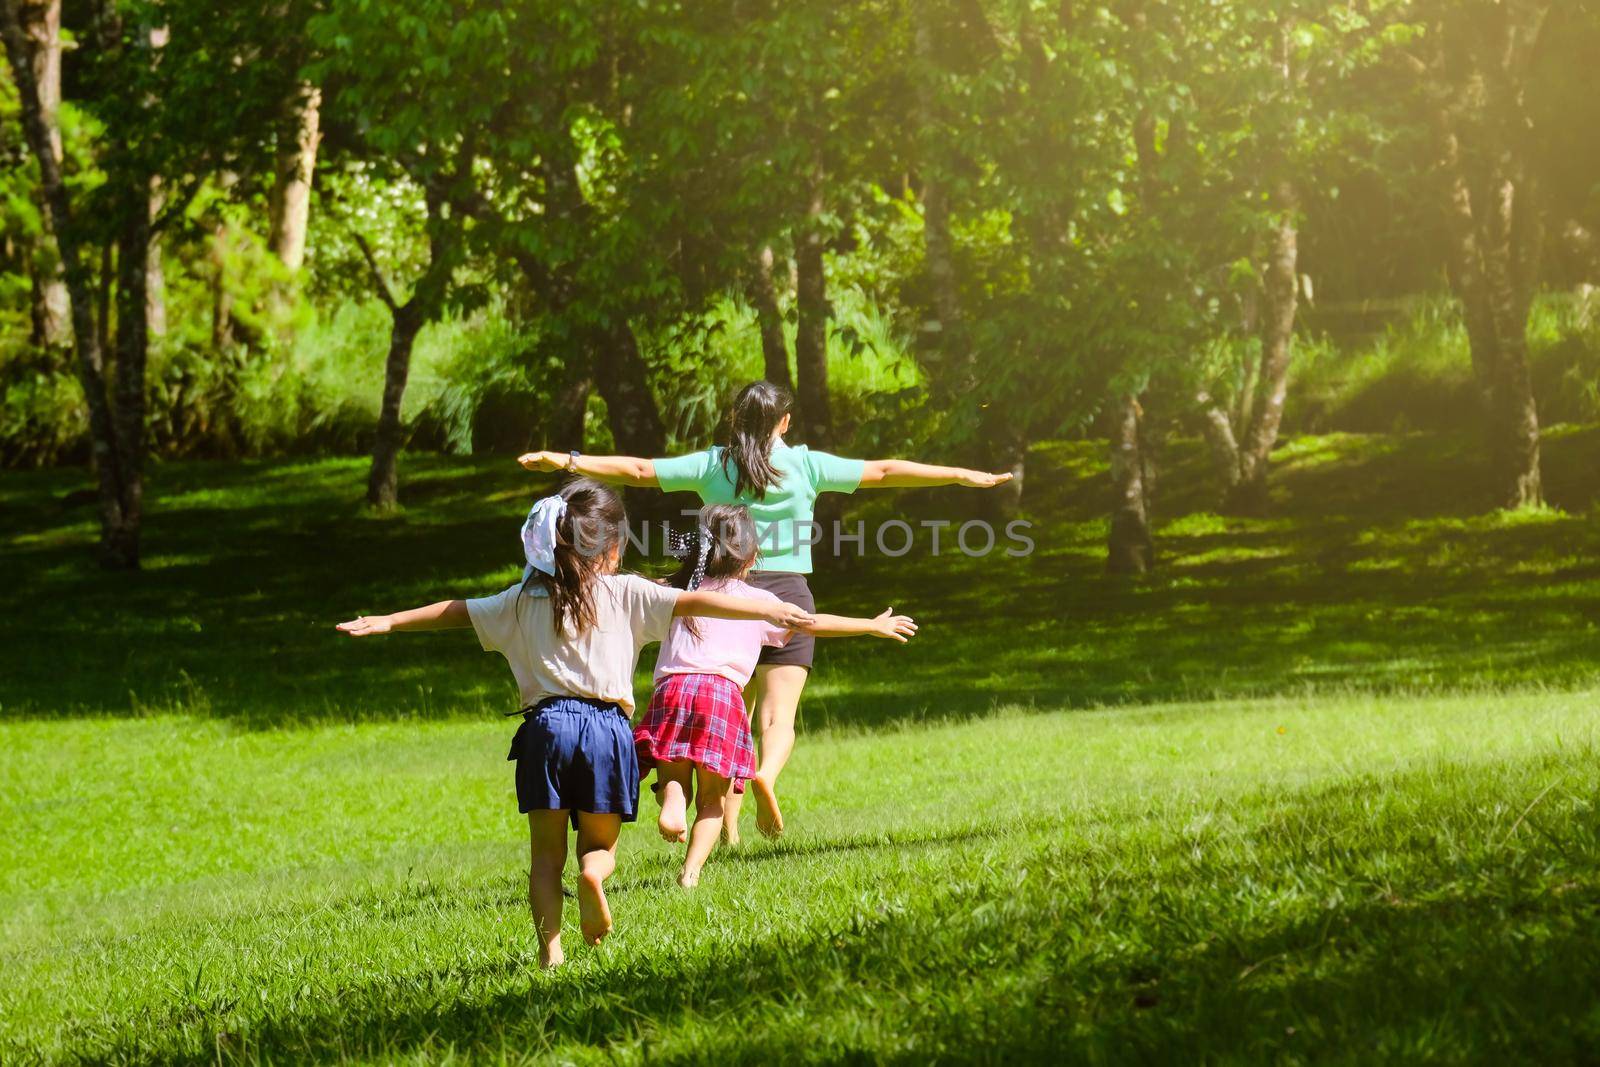 Two lovely daughters running with their mother spreading their arms as if flying in a spring garden. Rear view of young mother playing with children in the park. Happy family having fun in the park.